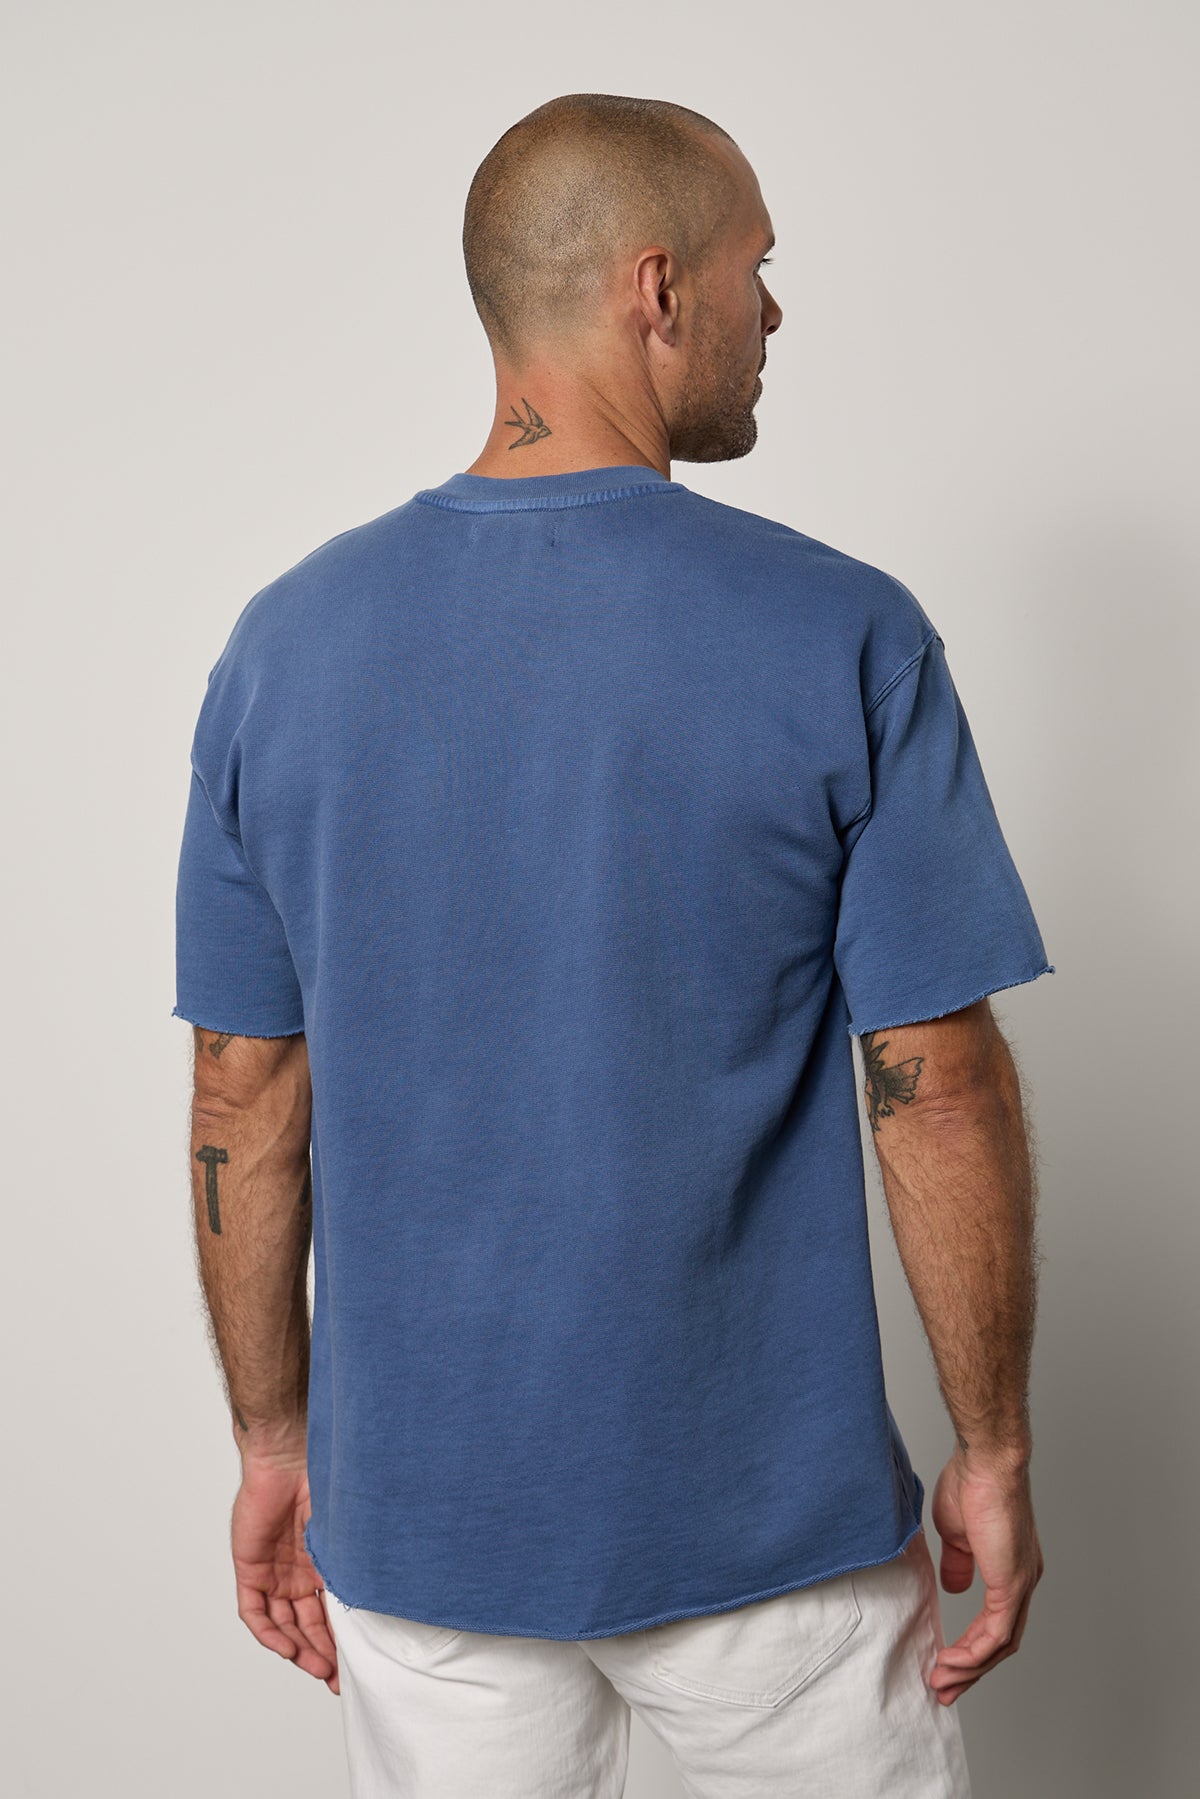 Saul Crew Neck Tee in anchor blue french terry and white denim back-26249401172161